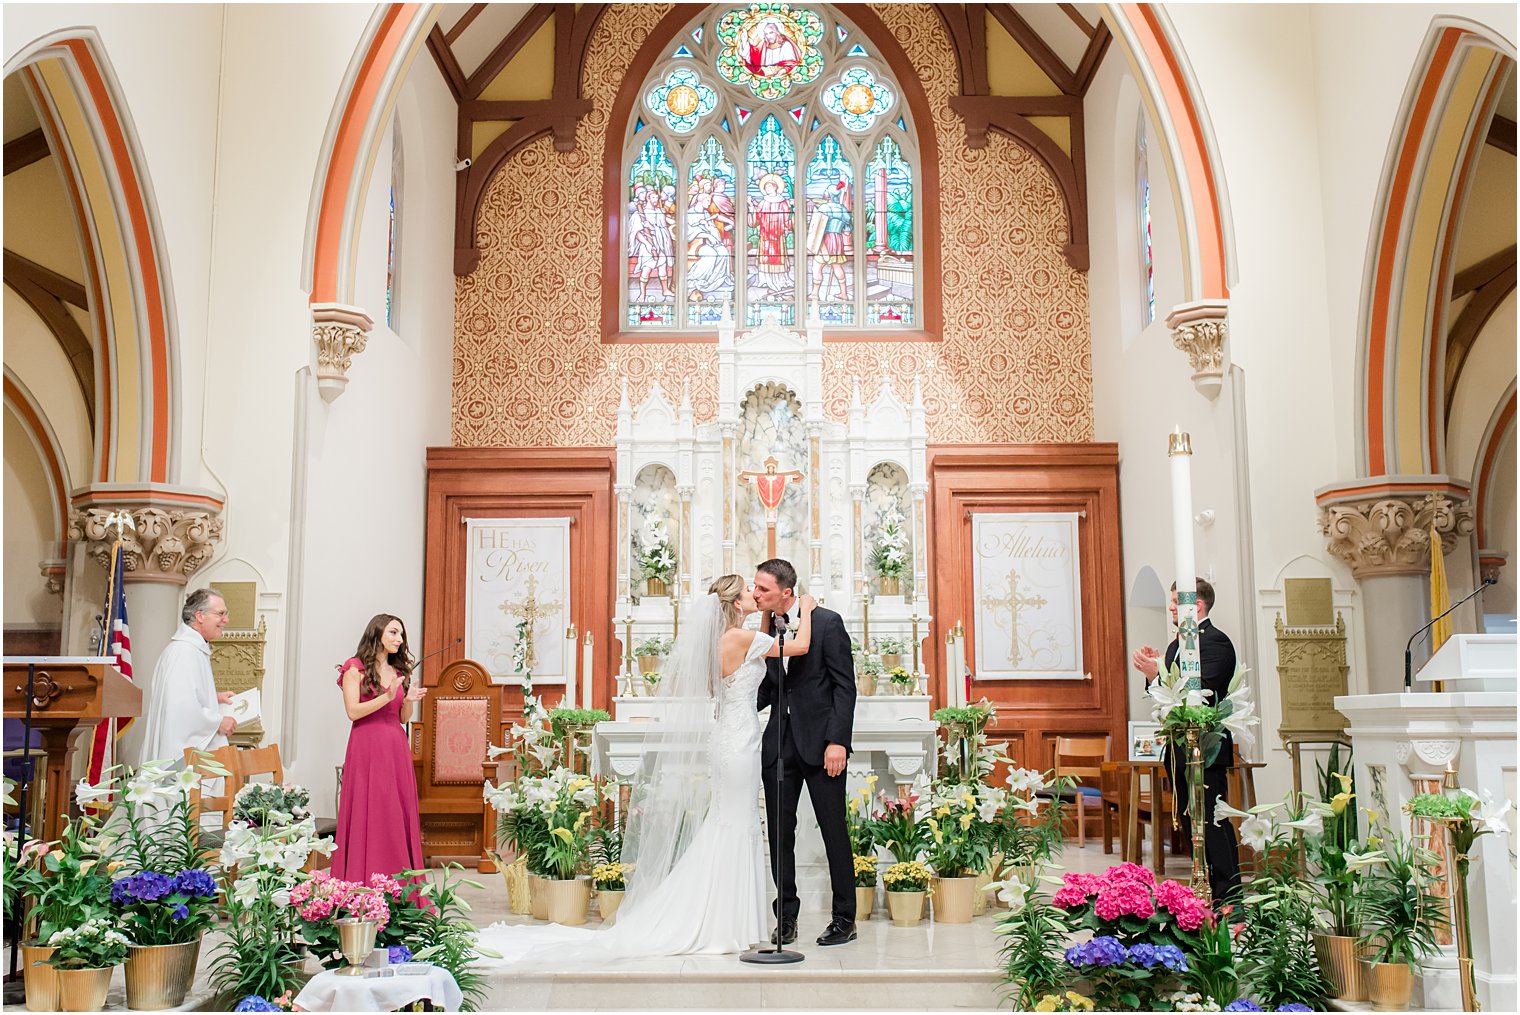 bride and groom kiss during ceremony at St. Vincent's Martyr Catholic Church